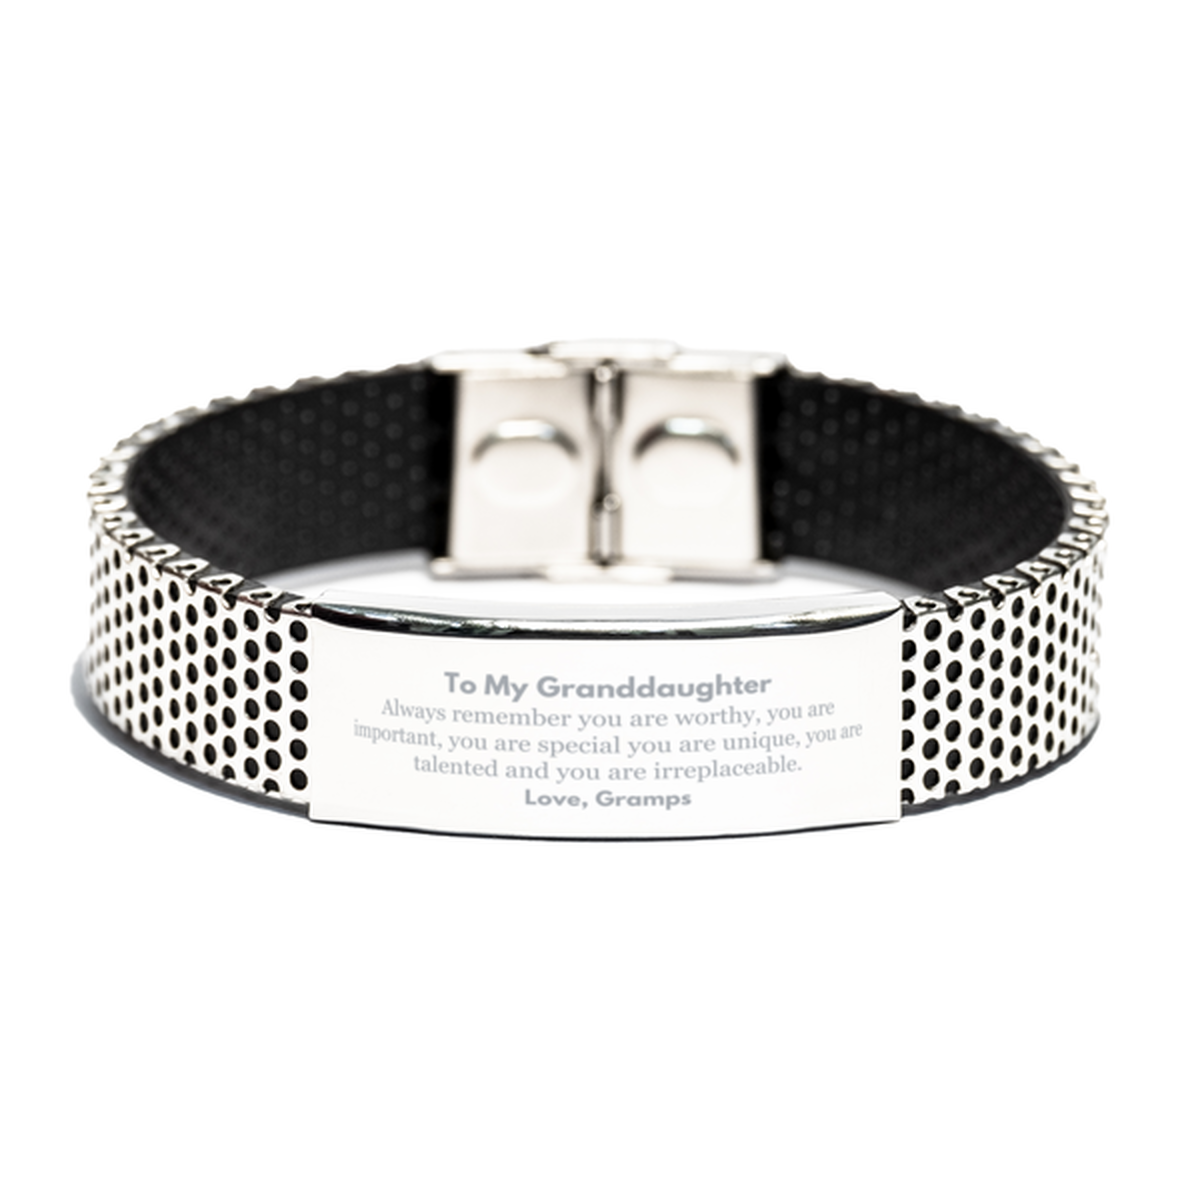 Granddaughter Birthday Gifts from Gramps, Inspirational Stainless Steel Bracelet for Granddaughter Christmas Graduation Gifts for Granddaughter Always remember you are worthy, you are important. Love, Gramps